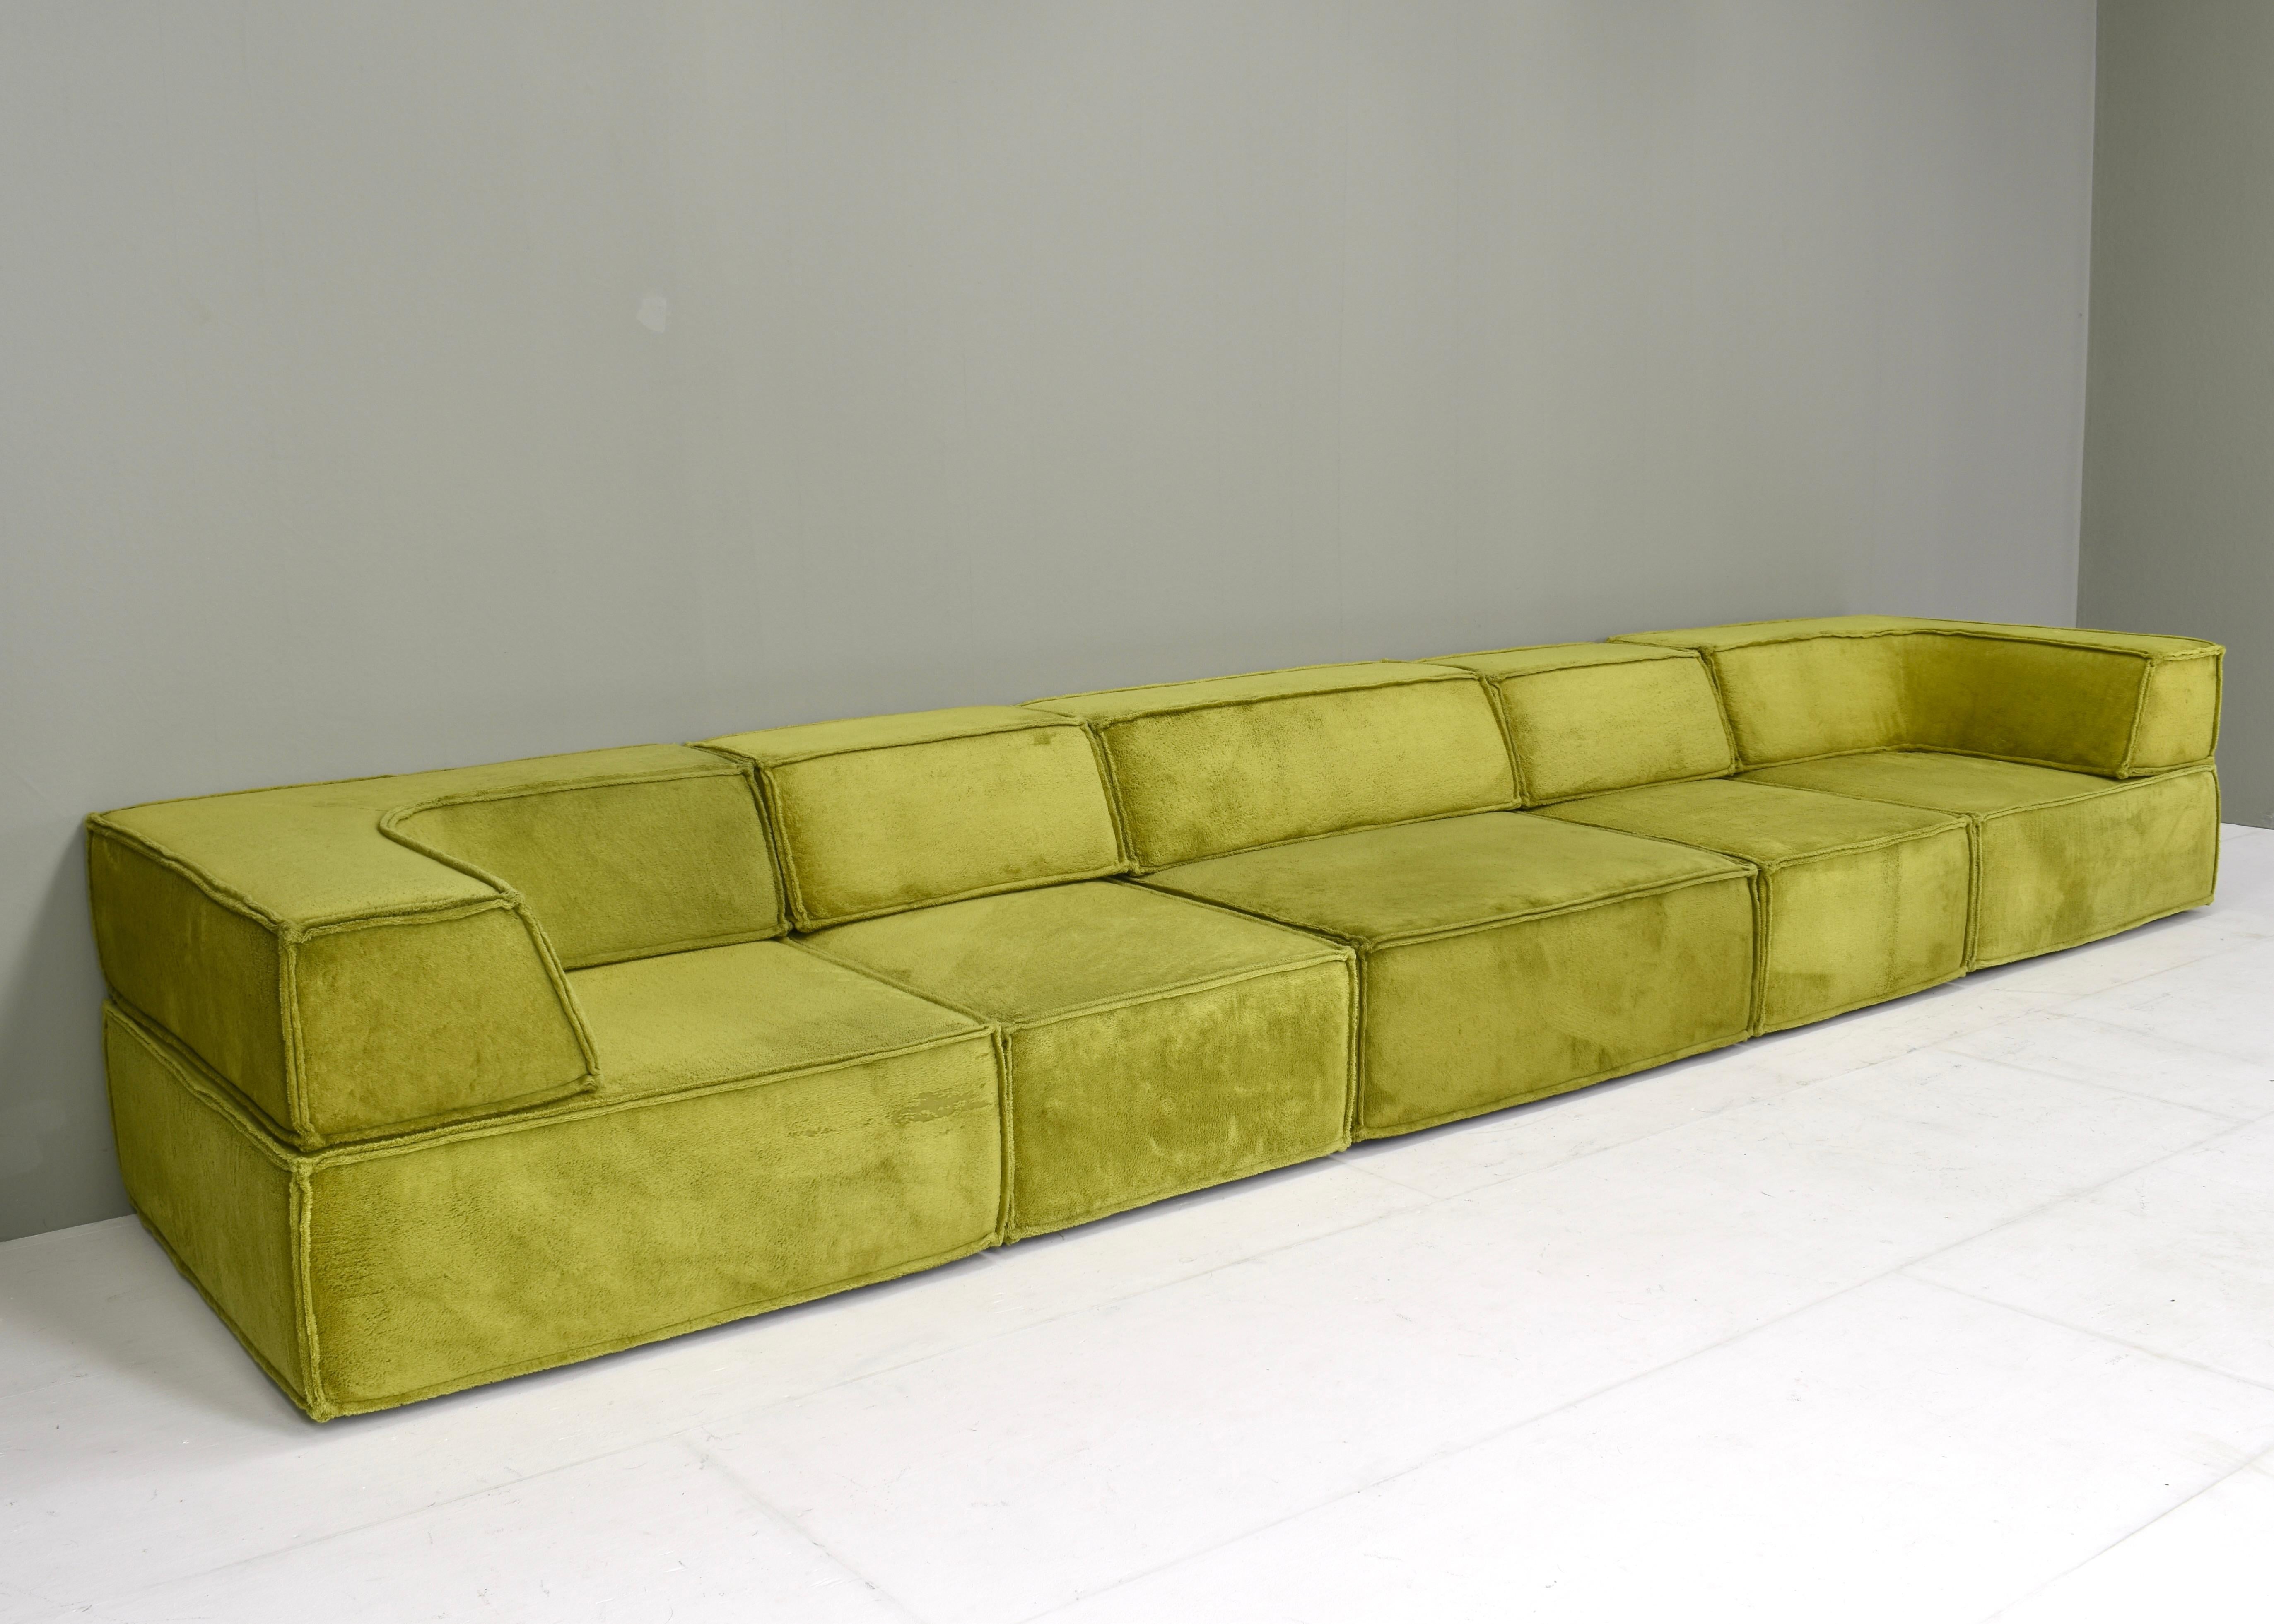 Mid-Century Modern COR Trio Sectional Sofa by Team Form Ag for COR, Germany / Switzerland, 1972